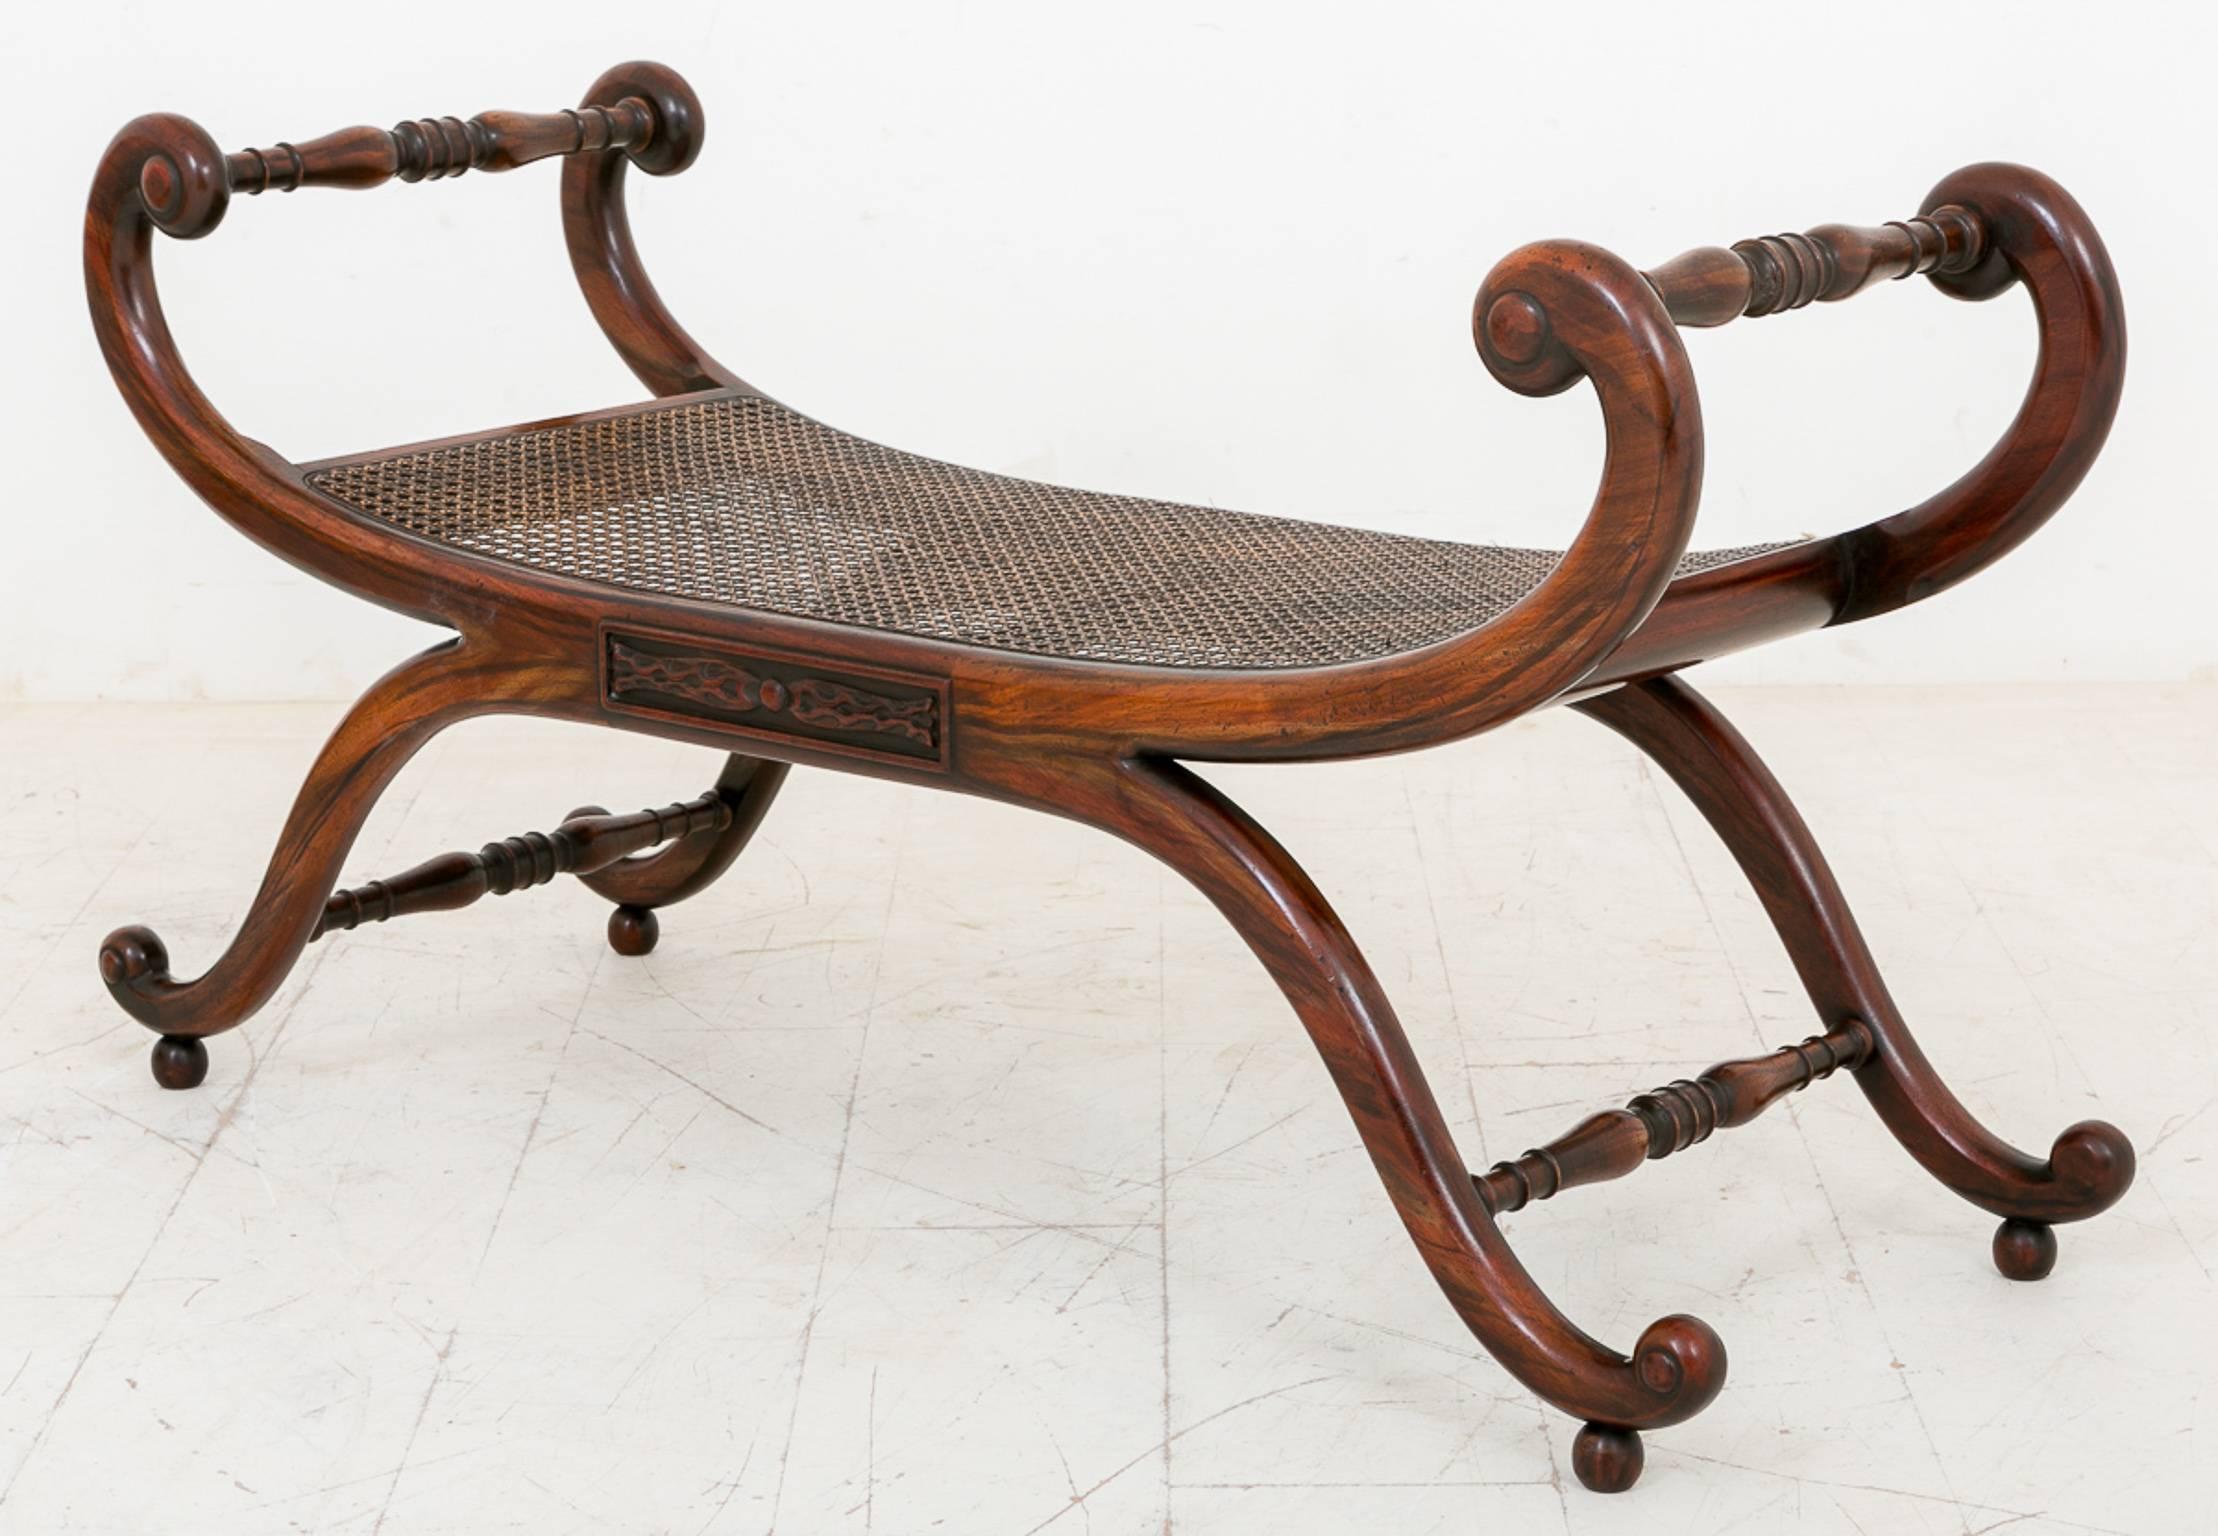 Here we have an unusual pair of simulated rosewood stools, standing on swept legs with ring turned stretchers.
The stools feature a carved panel and cane seats.

Size:
Maximum height 23